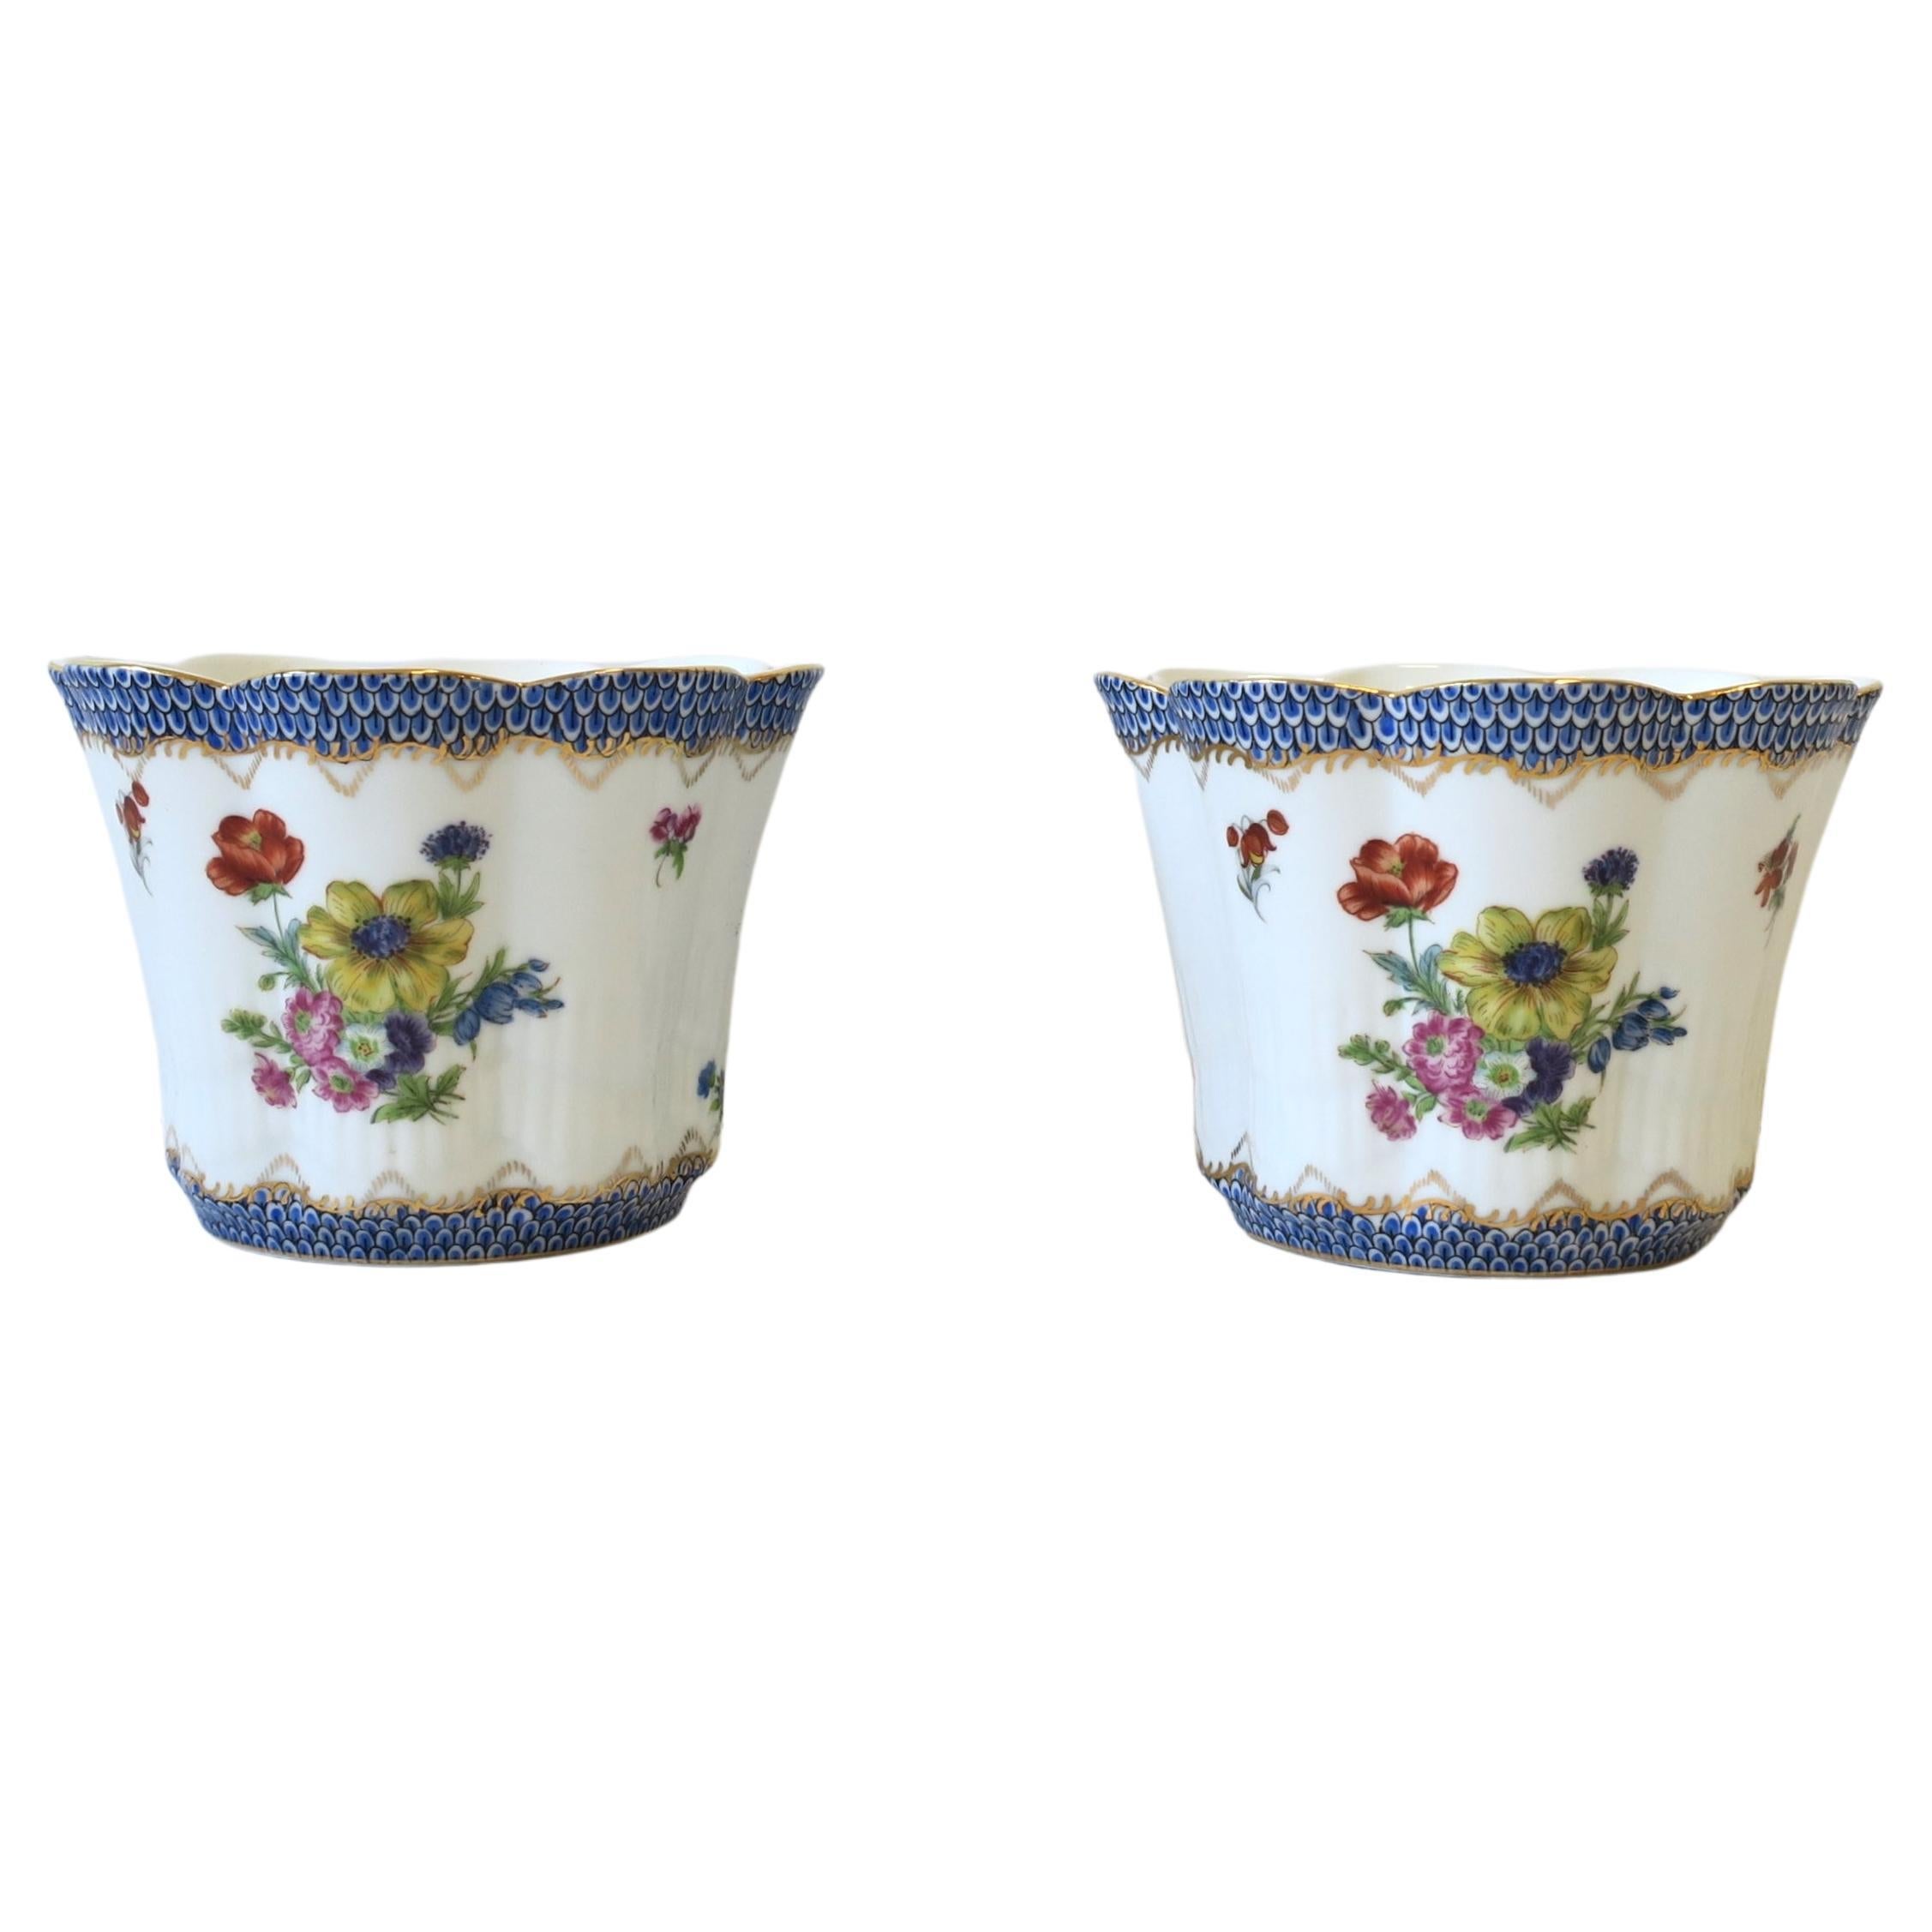 A beautiful pair of European porcelain flower or plant pot holders jardinieres or planter cachepots with flower and leaf design, circa mid-20th century, Europe. In the Herend or Sevres style. Jardinieres or cachepots have a flower and leaf design on